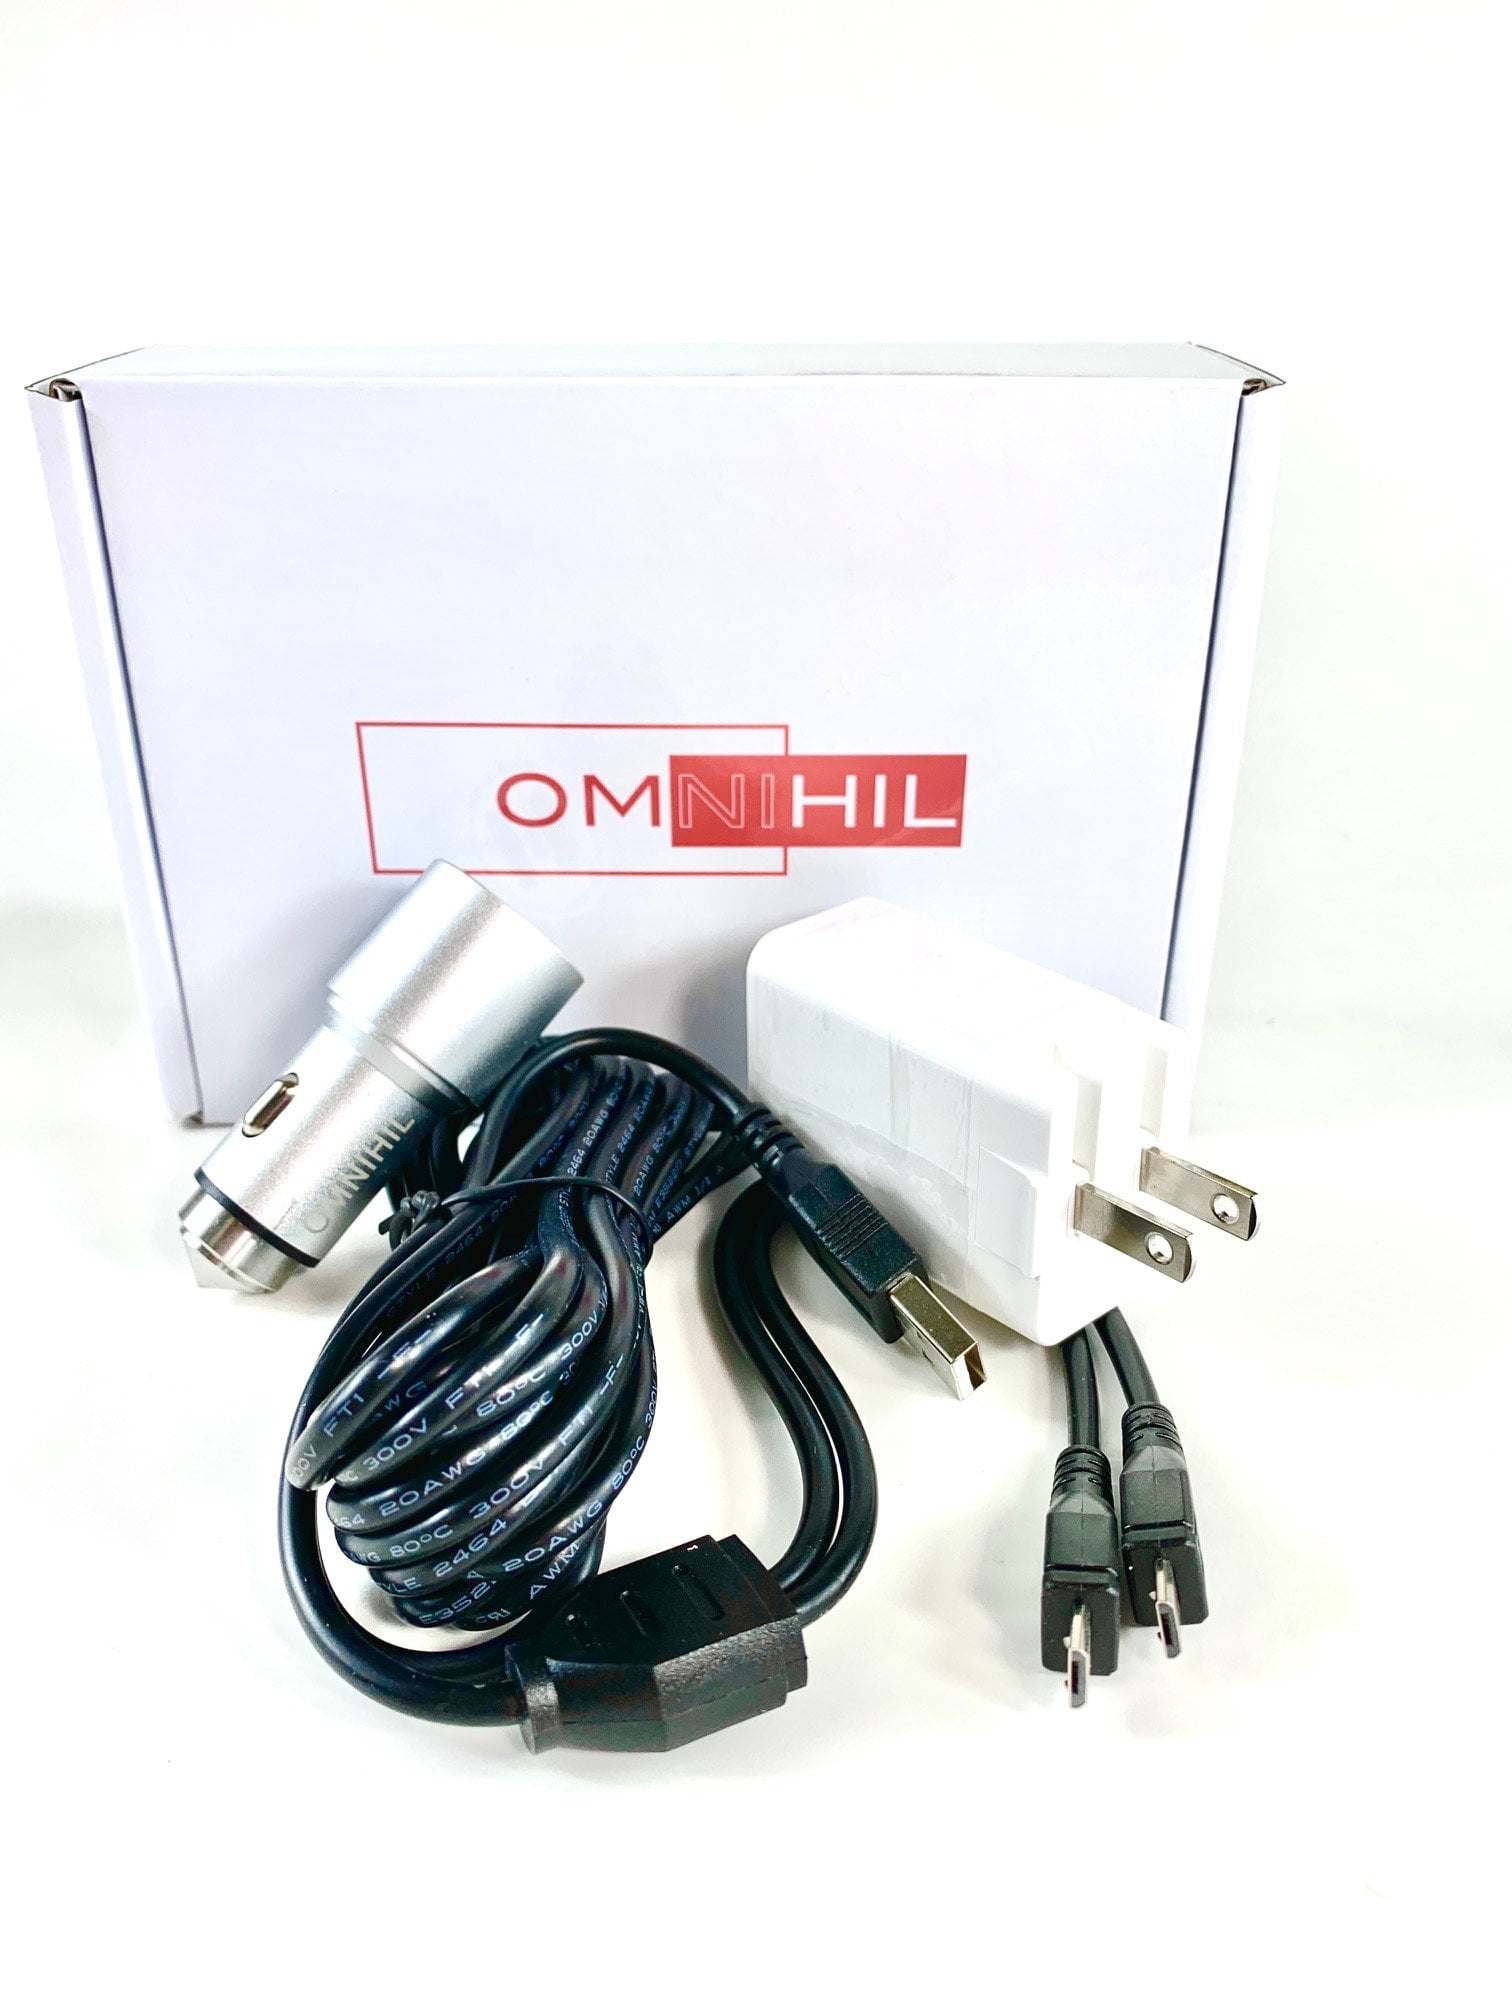 OMNIHIL 5 Feet Long High Speed USB 2.0 Cable Compatible with Midland X-TALKER T31VP 